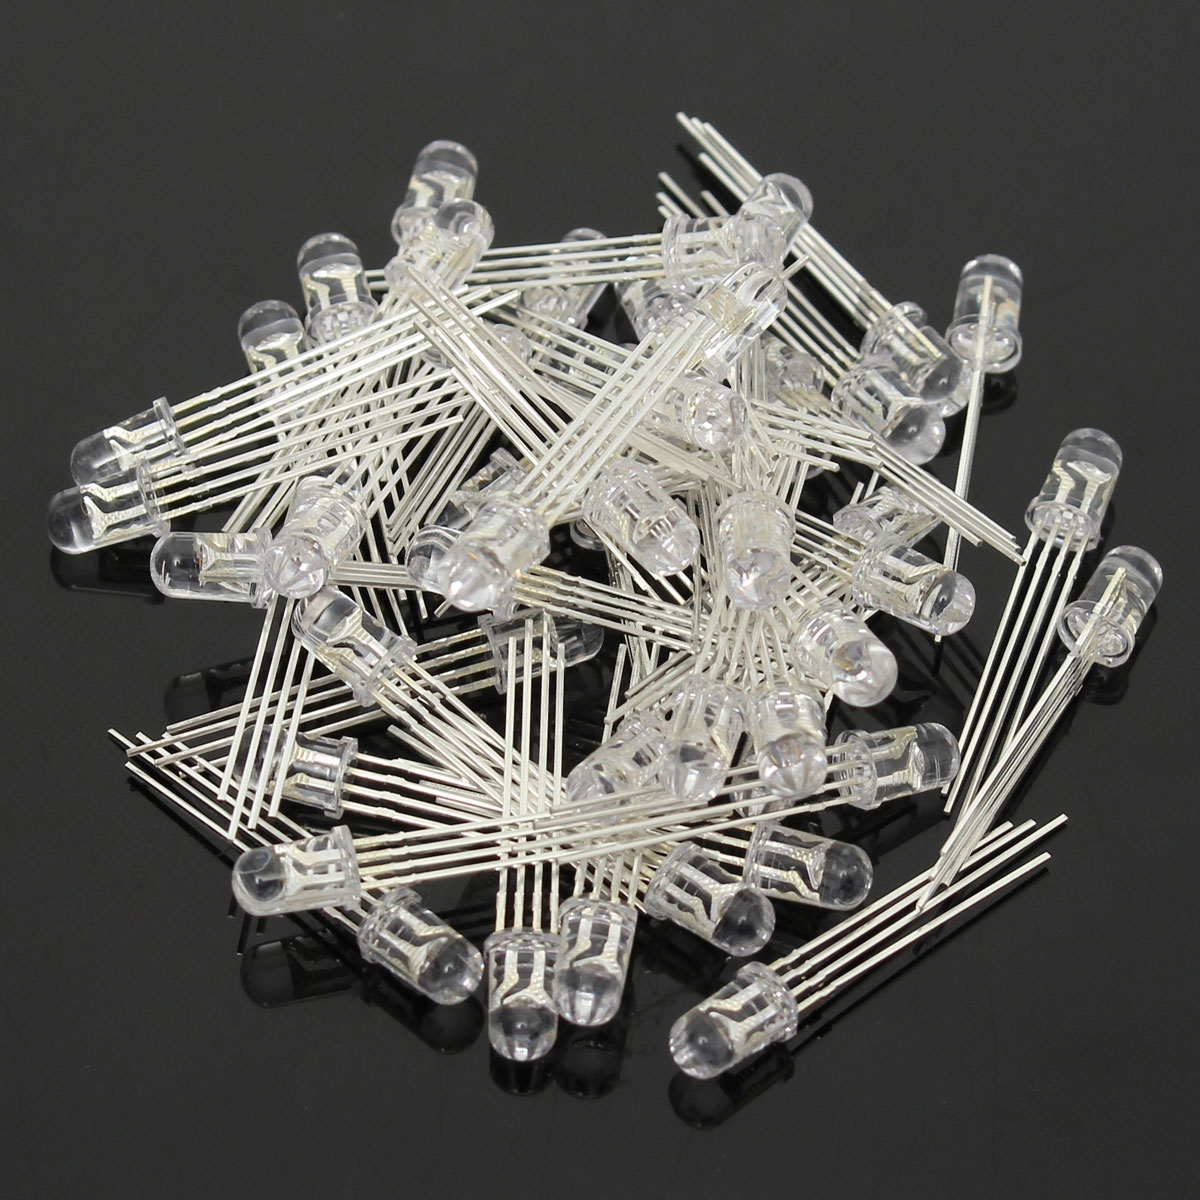 50pcs-5mm-Full-color-LED-RGB-Common-Anode-Four-Feet-Transparent-Highlight-Color-Light-5mm-Diode-Colo-1741304-2